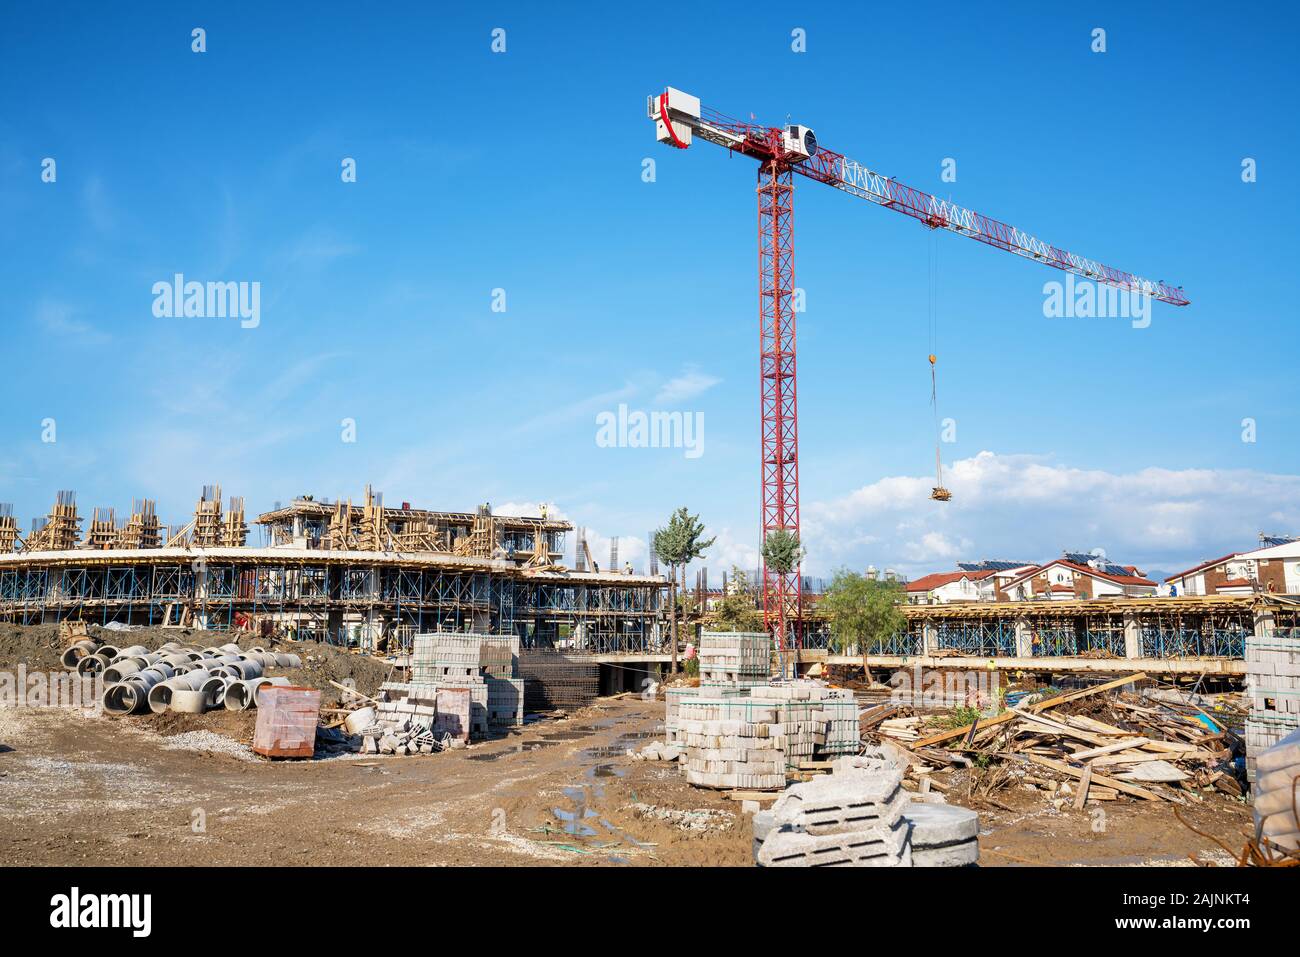 Construction of a building with a construction crane against the blue sky. Stock Photo